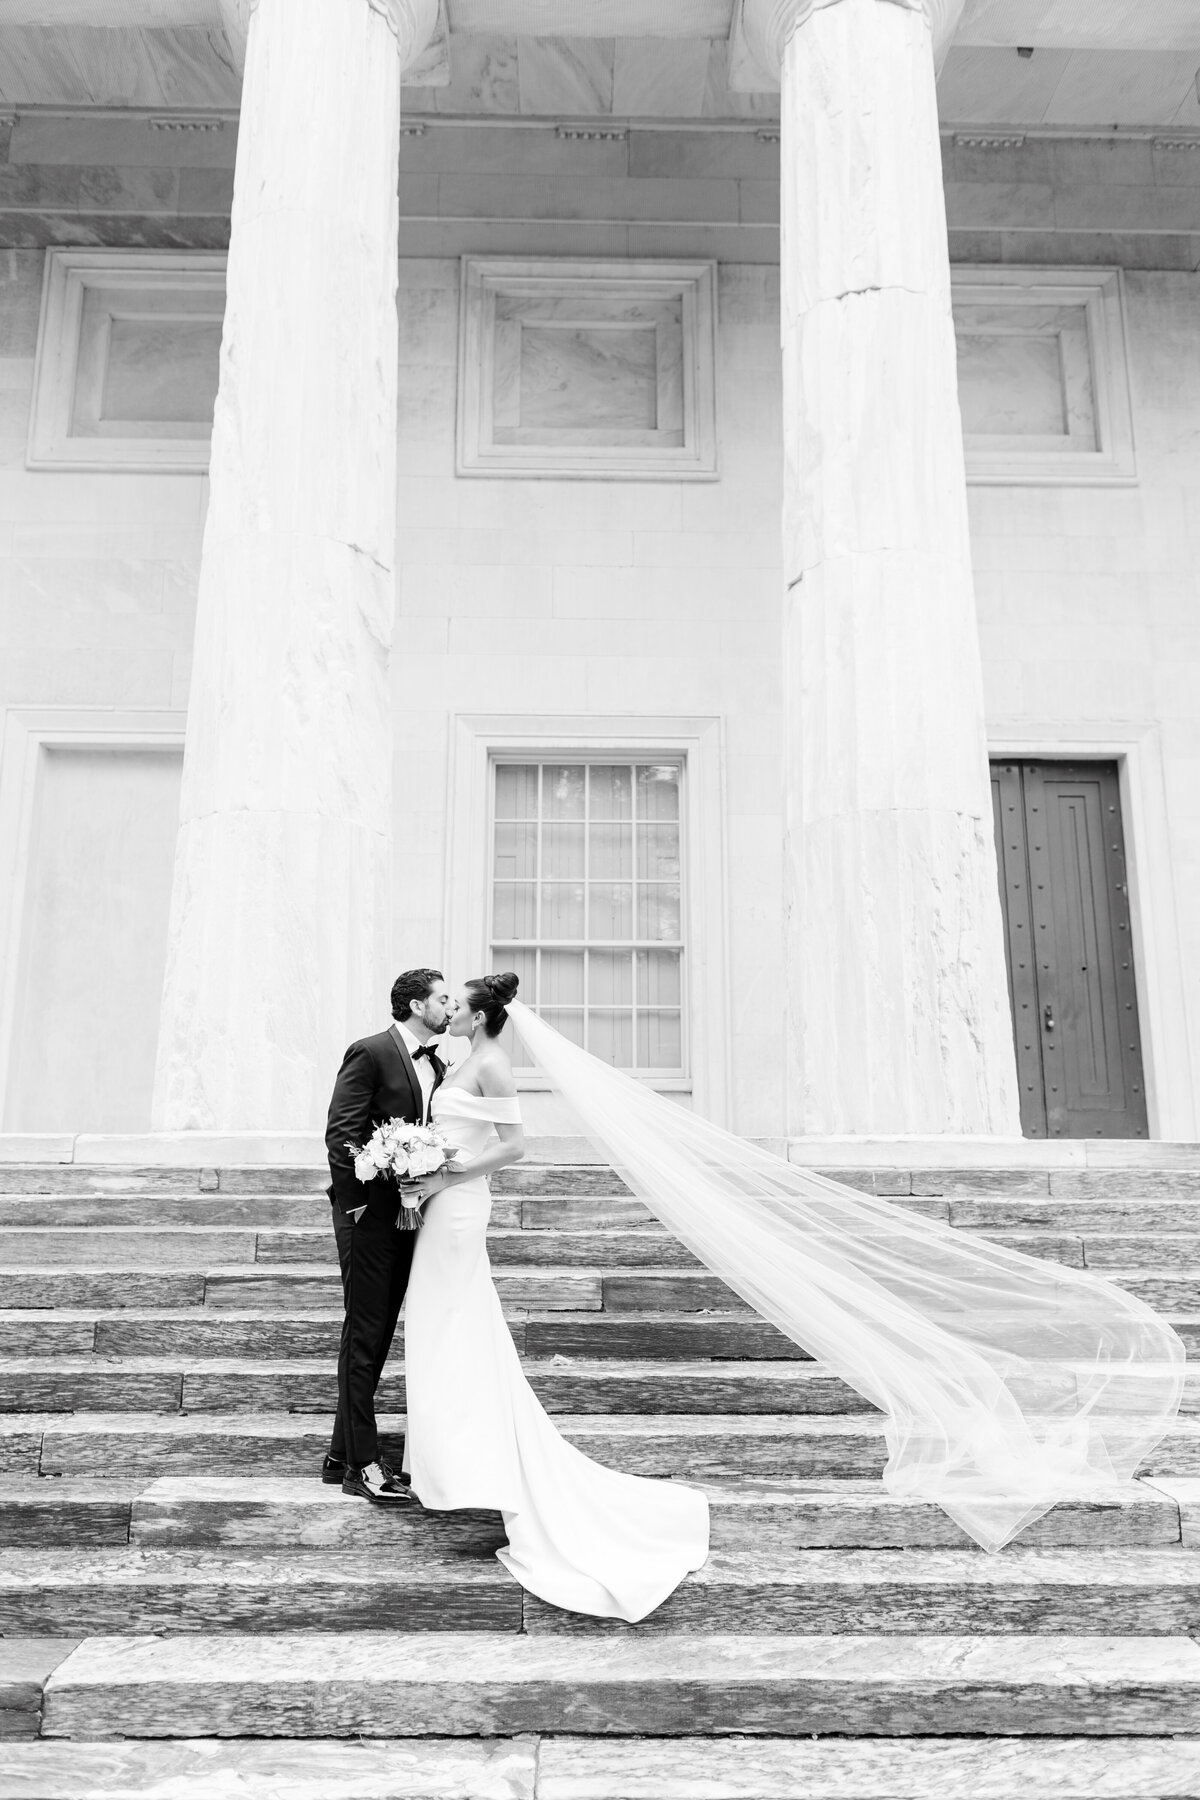 Siobhan Stanton Photography photographed a Philadelipia wedding featuring a modern editorial couple.